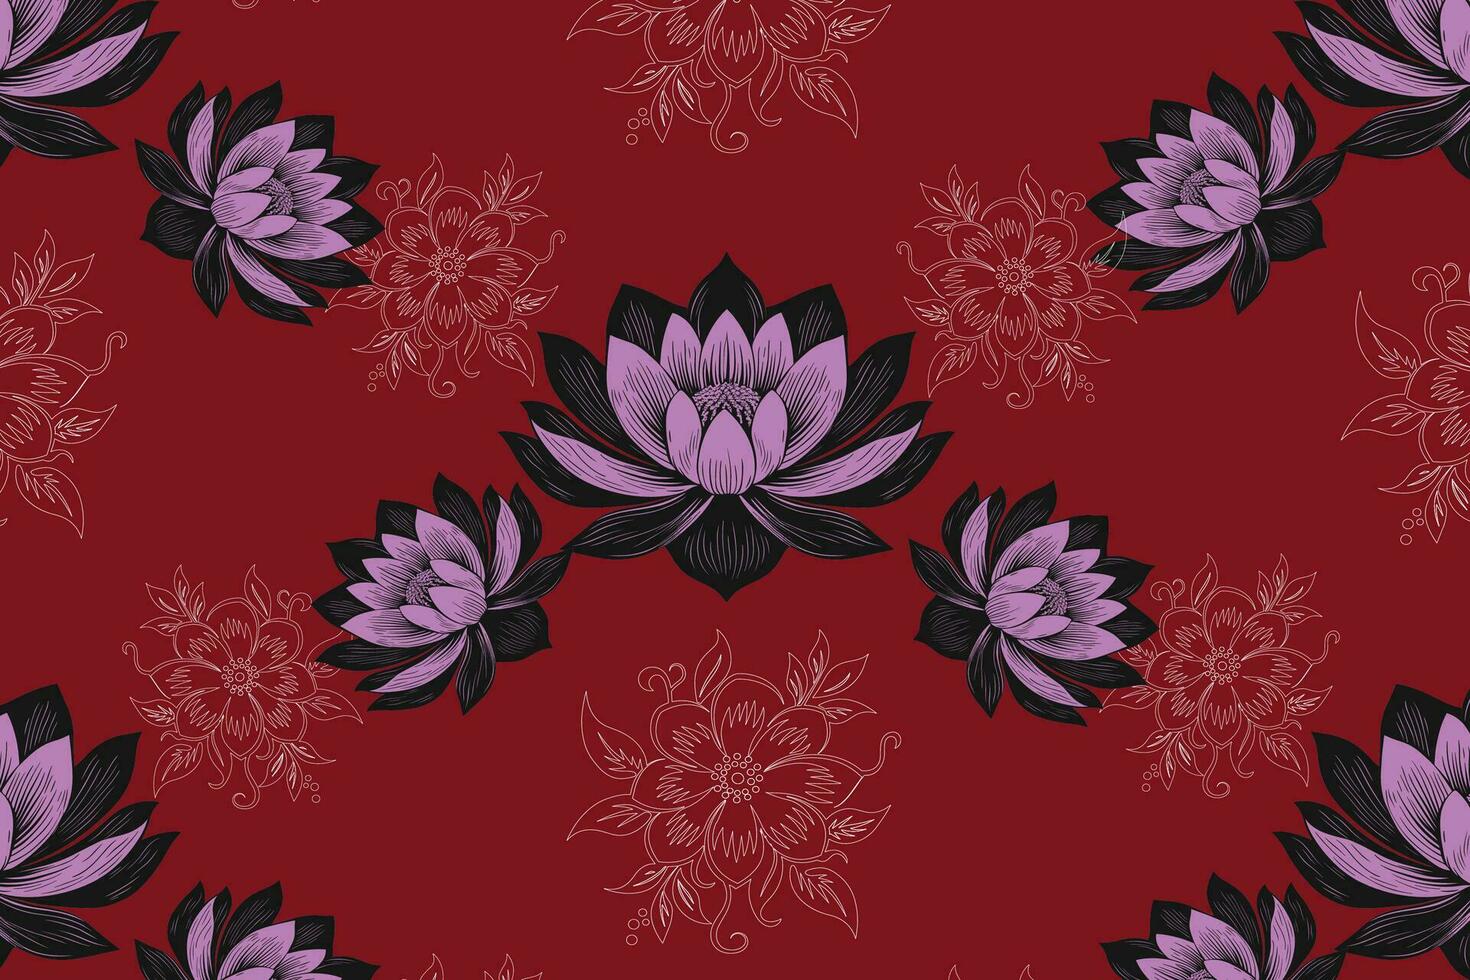 Diagonal Pattern of Detailed Pink and Black Lotus Flowers on a Deep Red Background vector